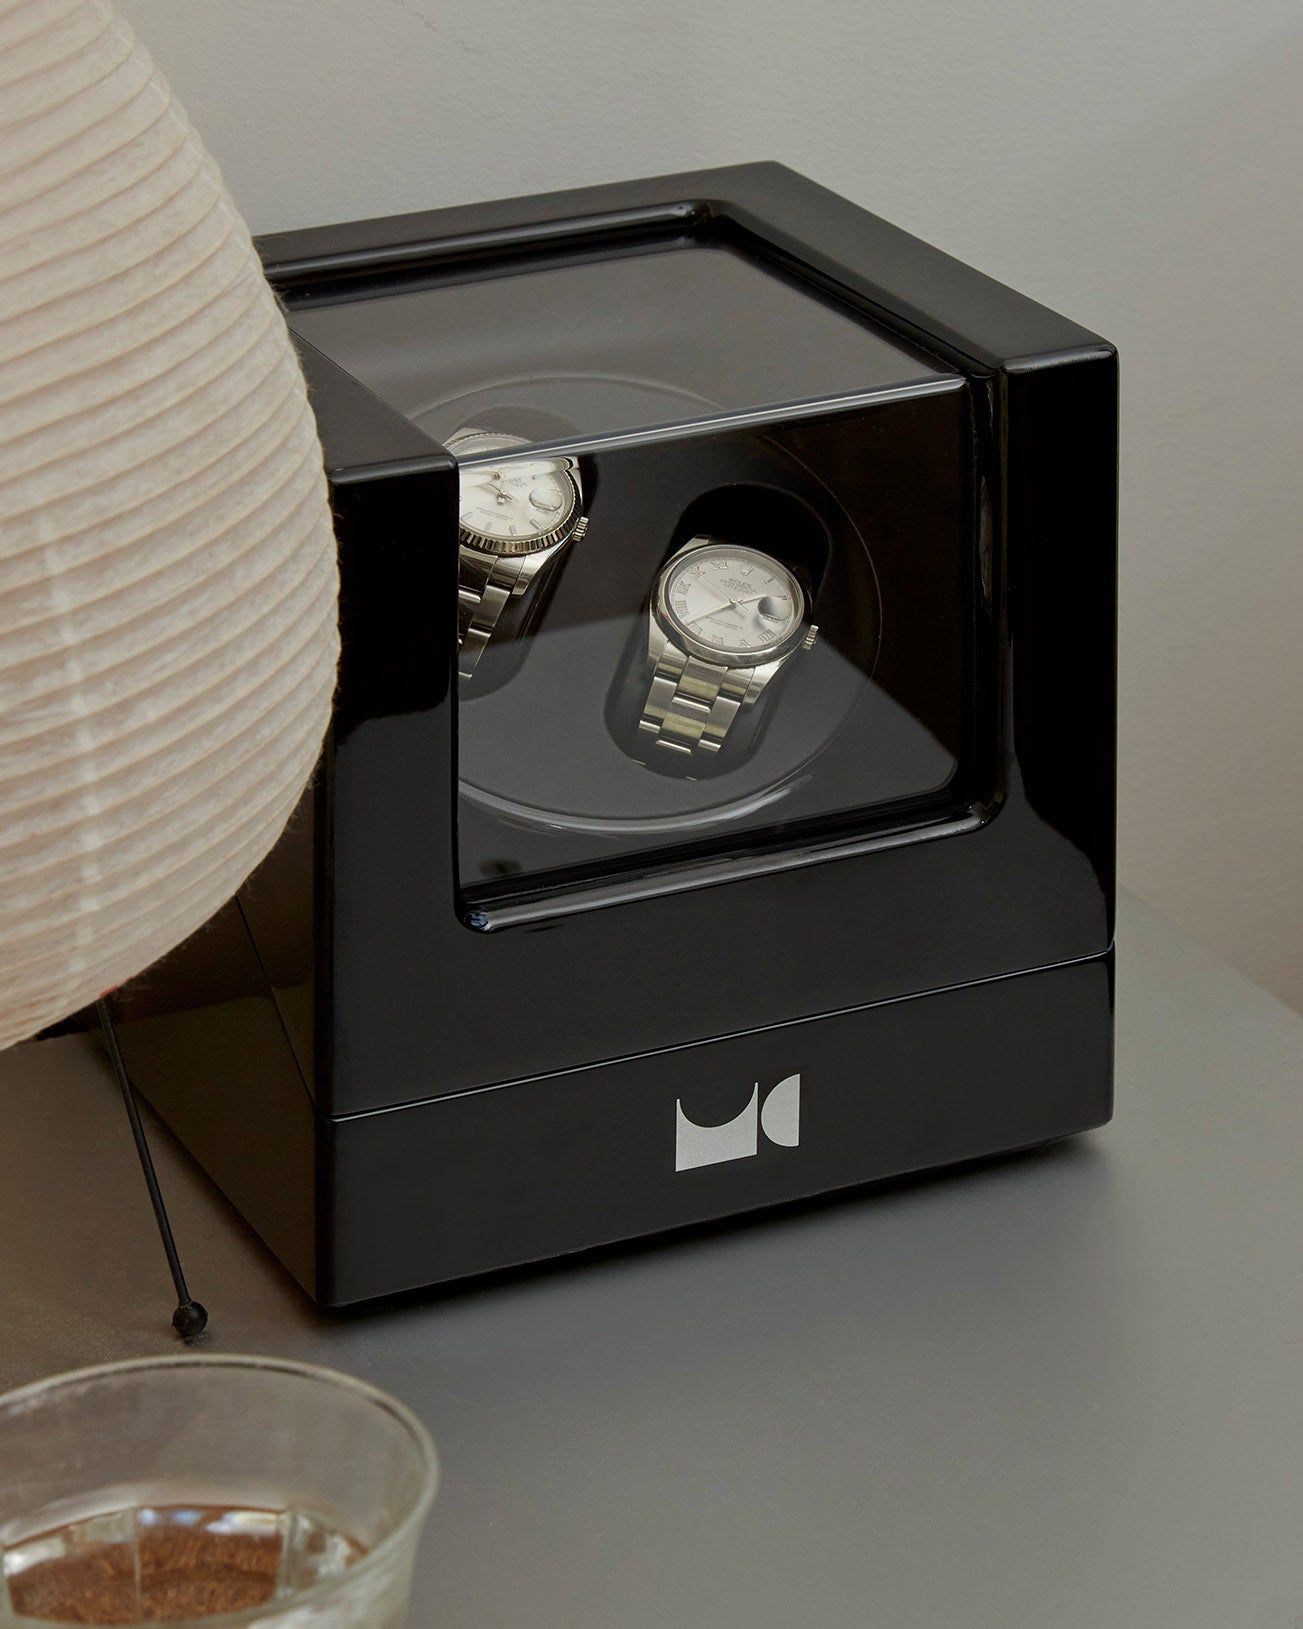 Watch winder with two watches on table.